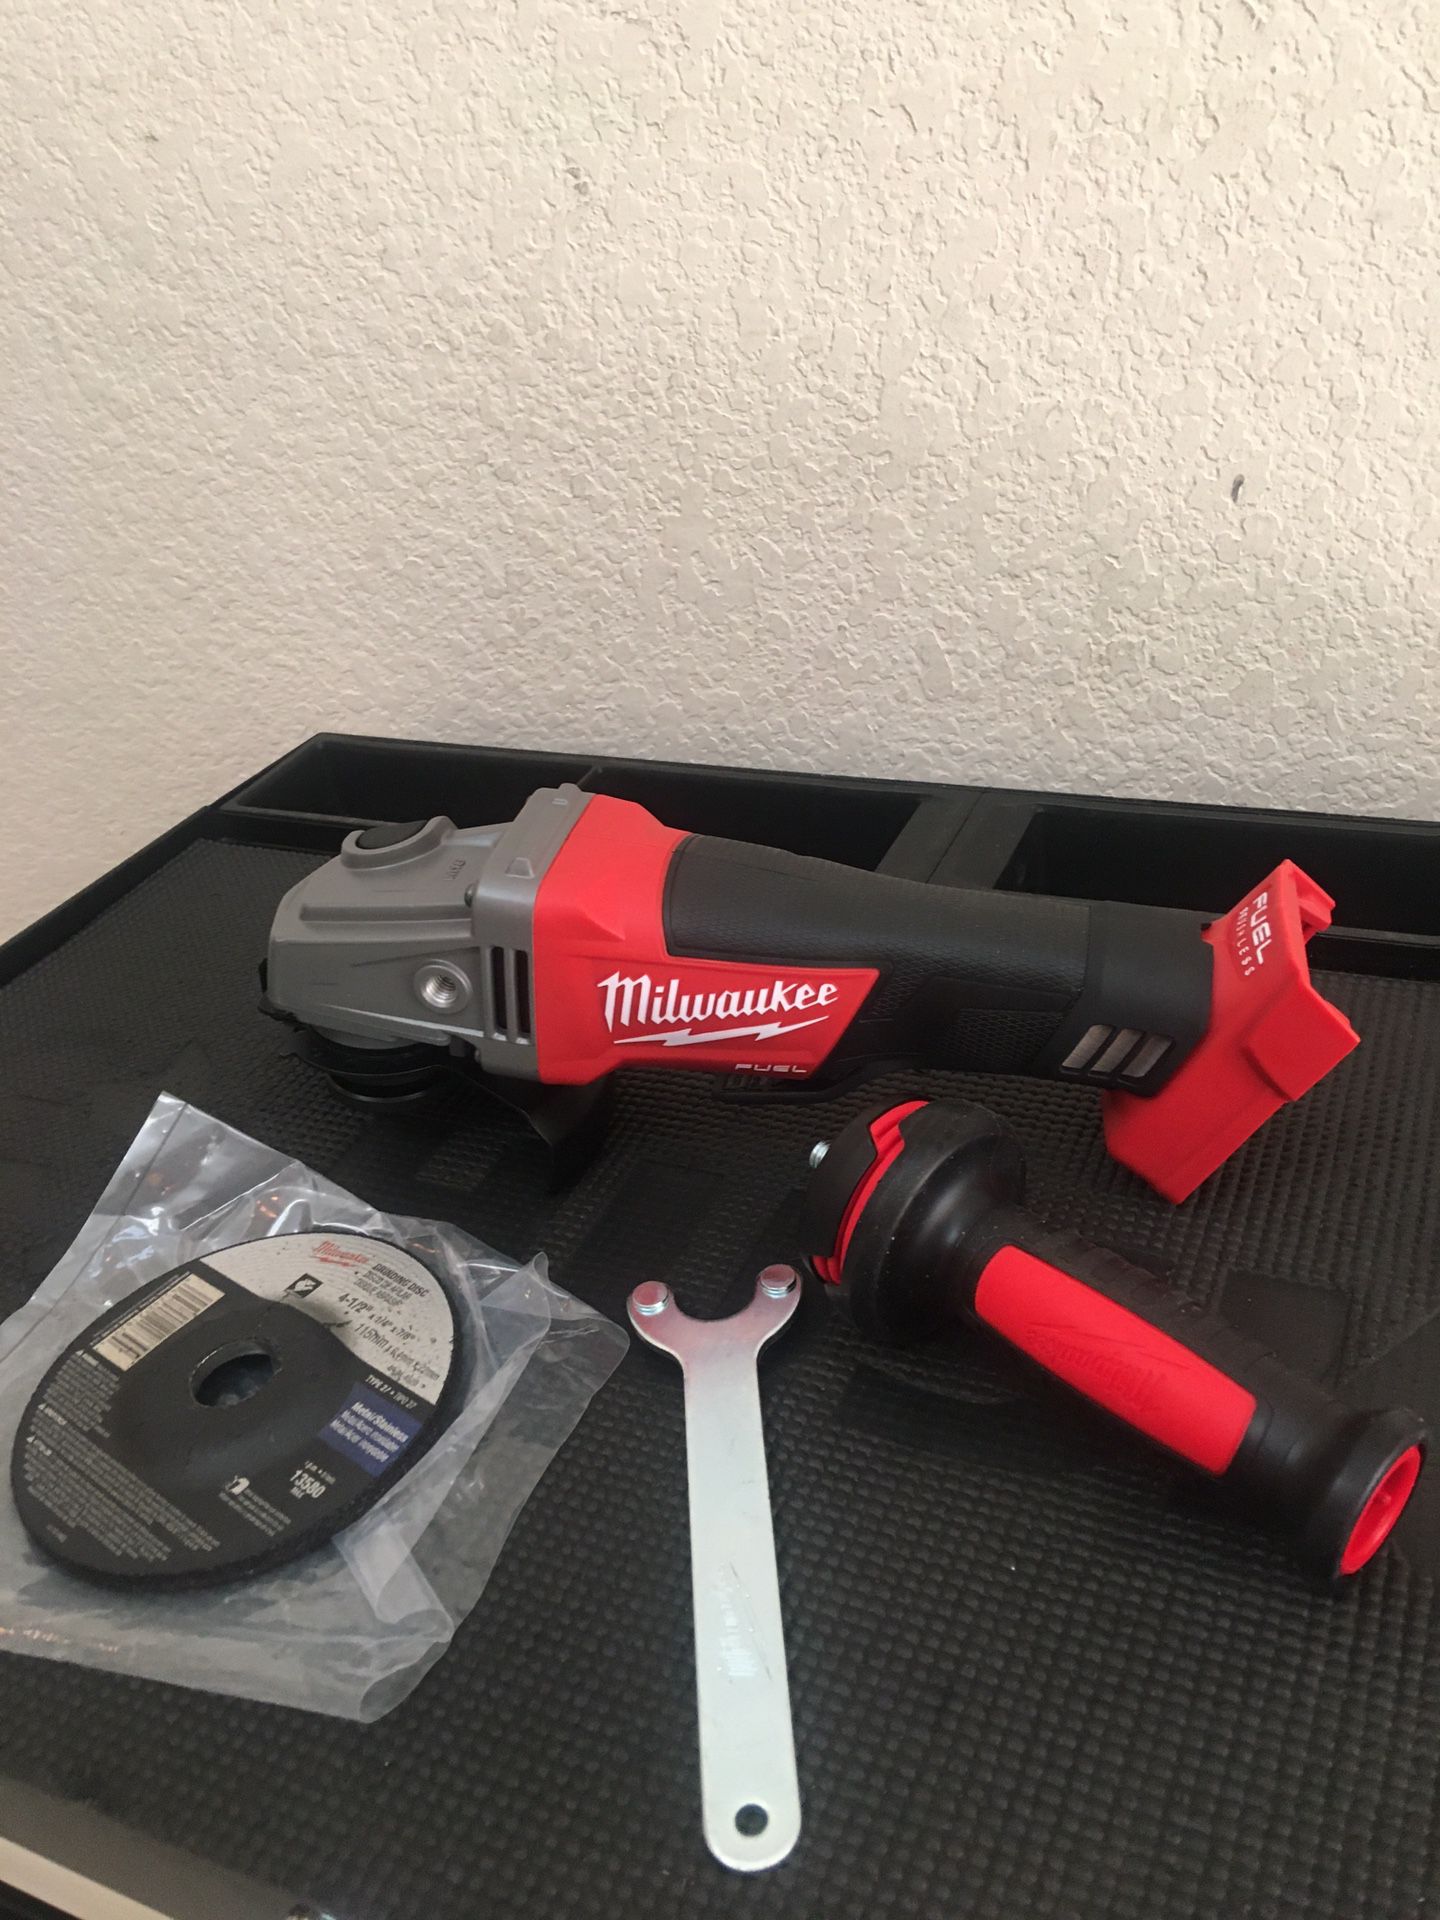 NEW MILWAUKEE M18 FUEL BRUSHLESS 4-1/2” GRINDER WITH PADDLE SWITCH